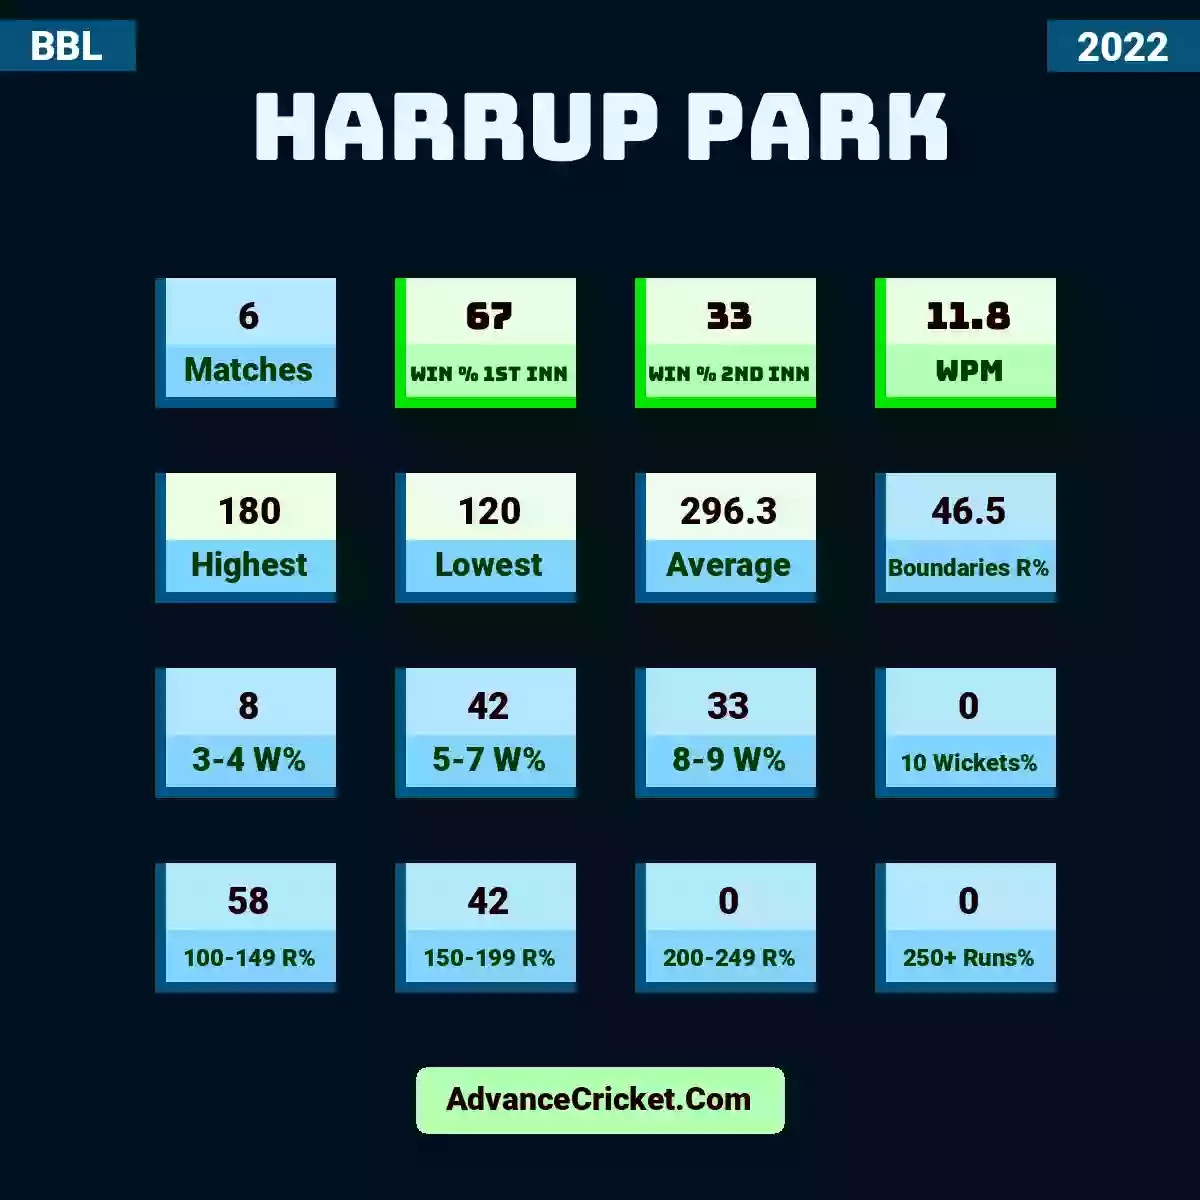 Image showing Harrup Park with Matches: 6, Win % 1st Inn: 67, Win % 2nd Inn: 33, WPM: 11.8, Highest: 180, Lowest: 120, Average: 296.3, Boundaries R%: 46.5, 3-4 W%: 8, 5-7 W%: 42, 8-9 W%: 33, 10 Wickets%: 0, 100-149 R%: 58, 150-199 R%: 42, 200-249 R%: 0, 250+ Runs%: 0.